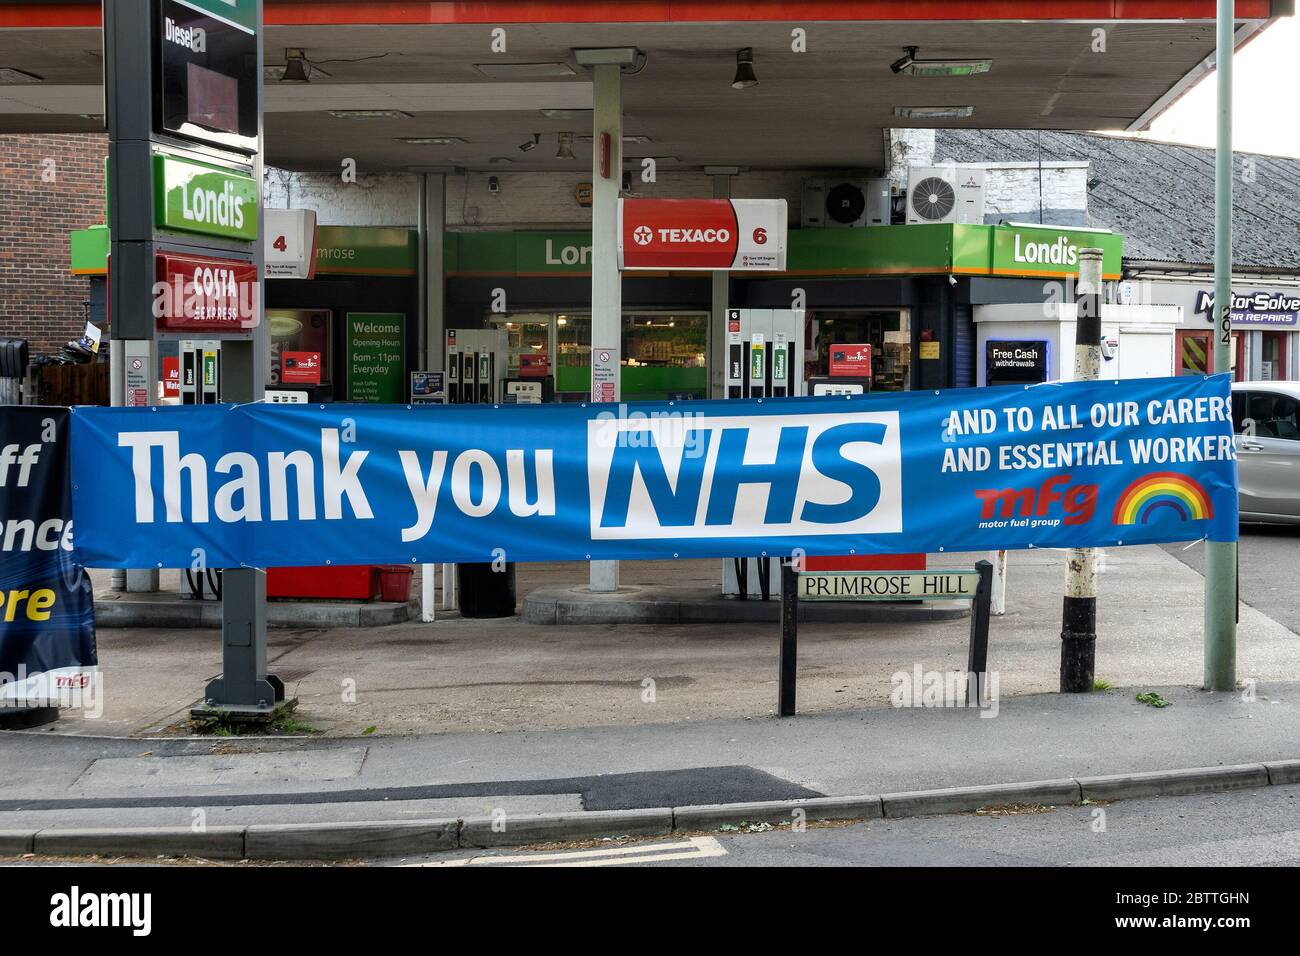 Kings Langley UK. Filling station displaying large Thank You NHS banner. A tribute and thanks to the NHS, Carers and Essential Workers during the Coronavirus Pandemic lockdown and fight against COVID-19. Supplied by the Motor Fuel Group. Credit: Stephen Bell/Alamy Stock Photo